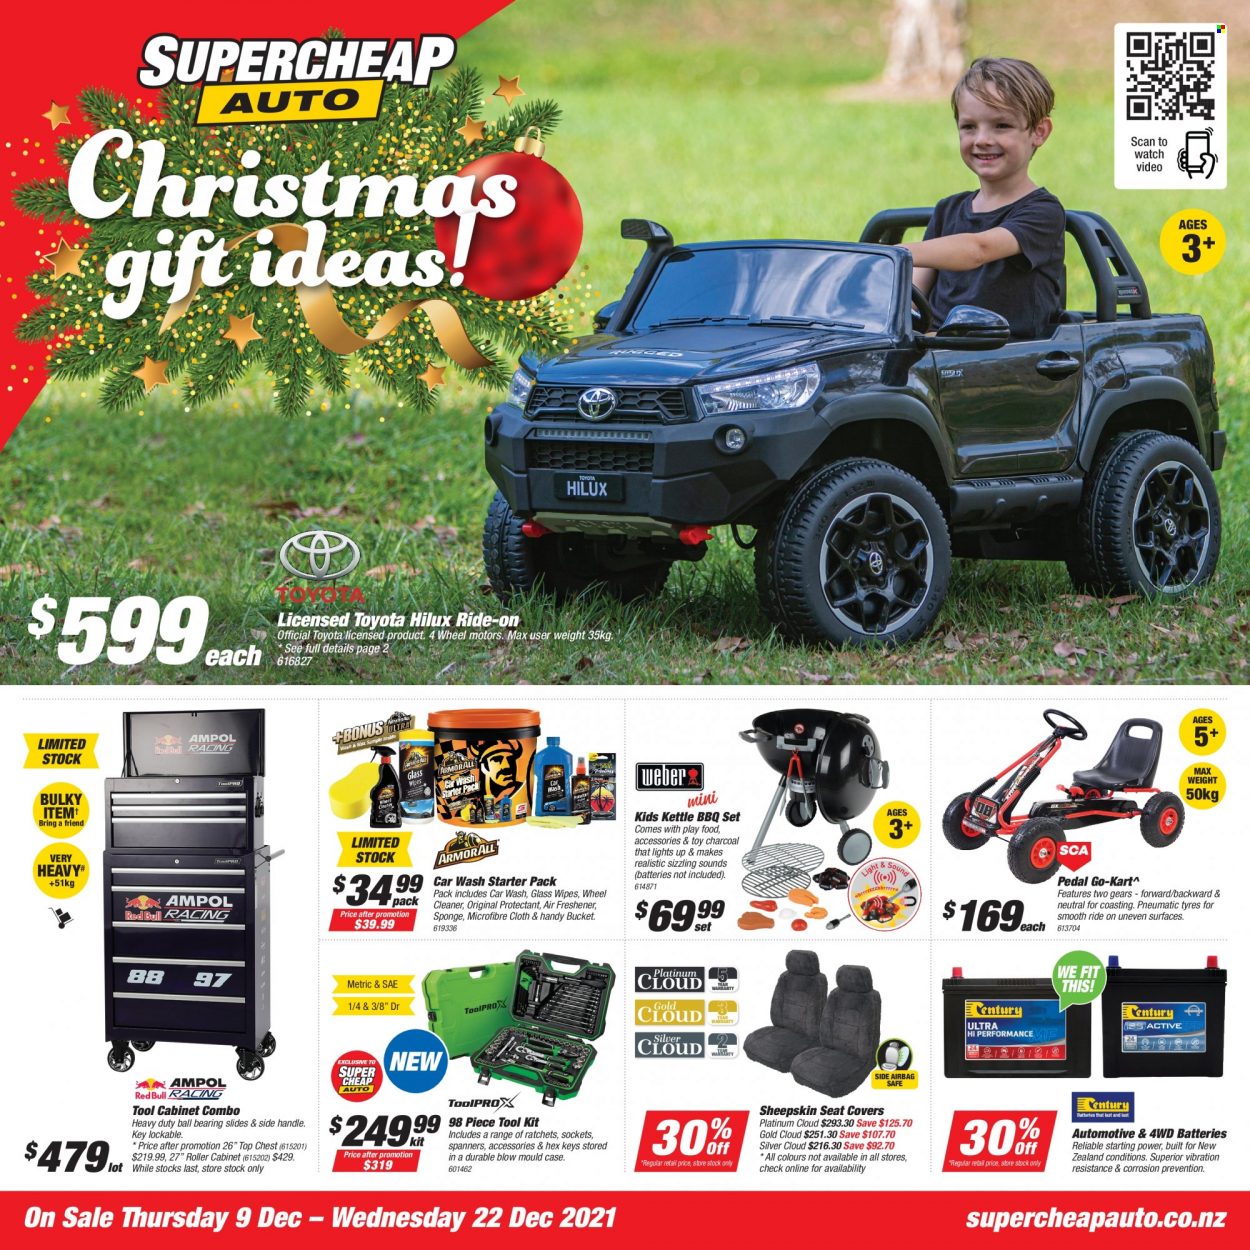 SuperCheap Auto mailer - 09.12.2021 - 22.12.2021 - Sales products - wipes, cleaner, sponge, tool set, cabinet, tool cabinets, charcoal, go-kart, car seat cover, car battery, automotive batteries, air freshener, tires. Page 1.